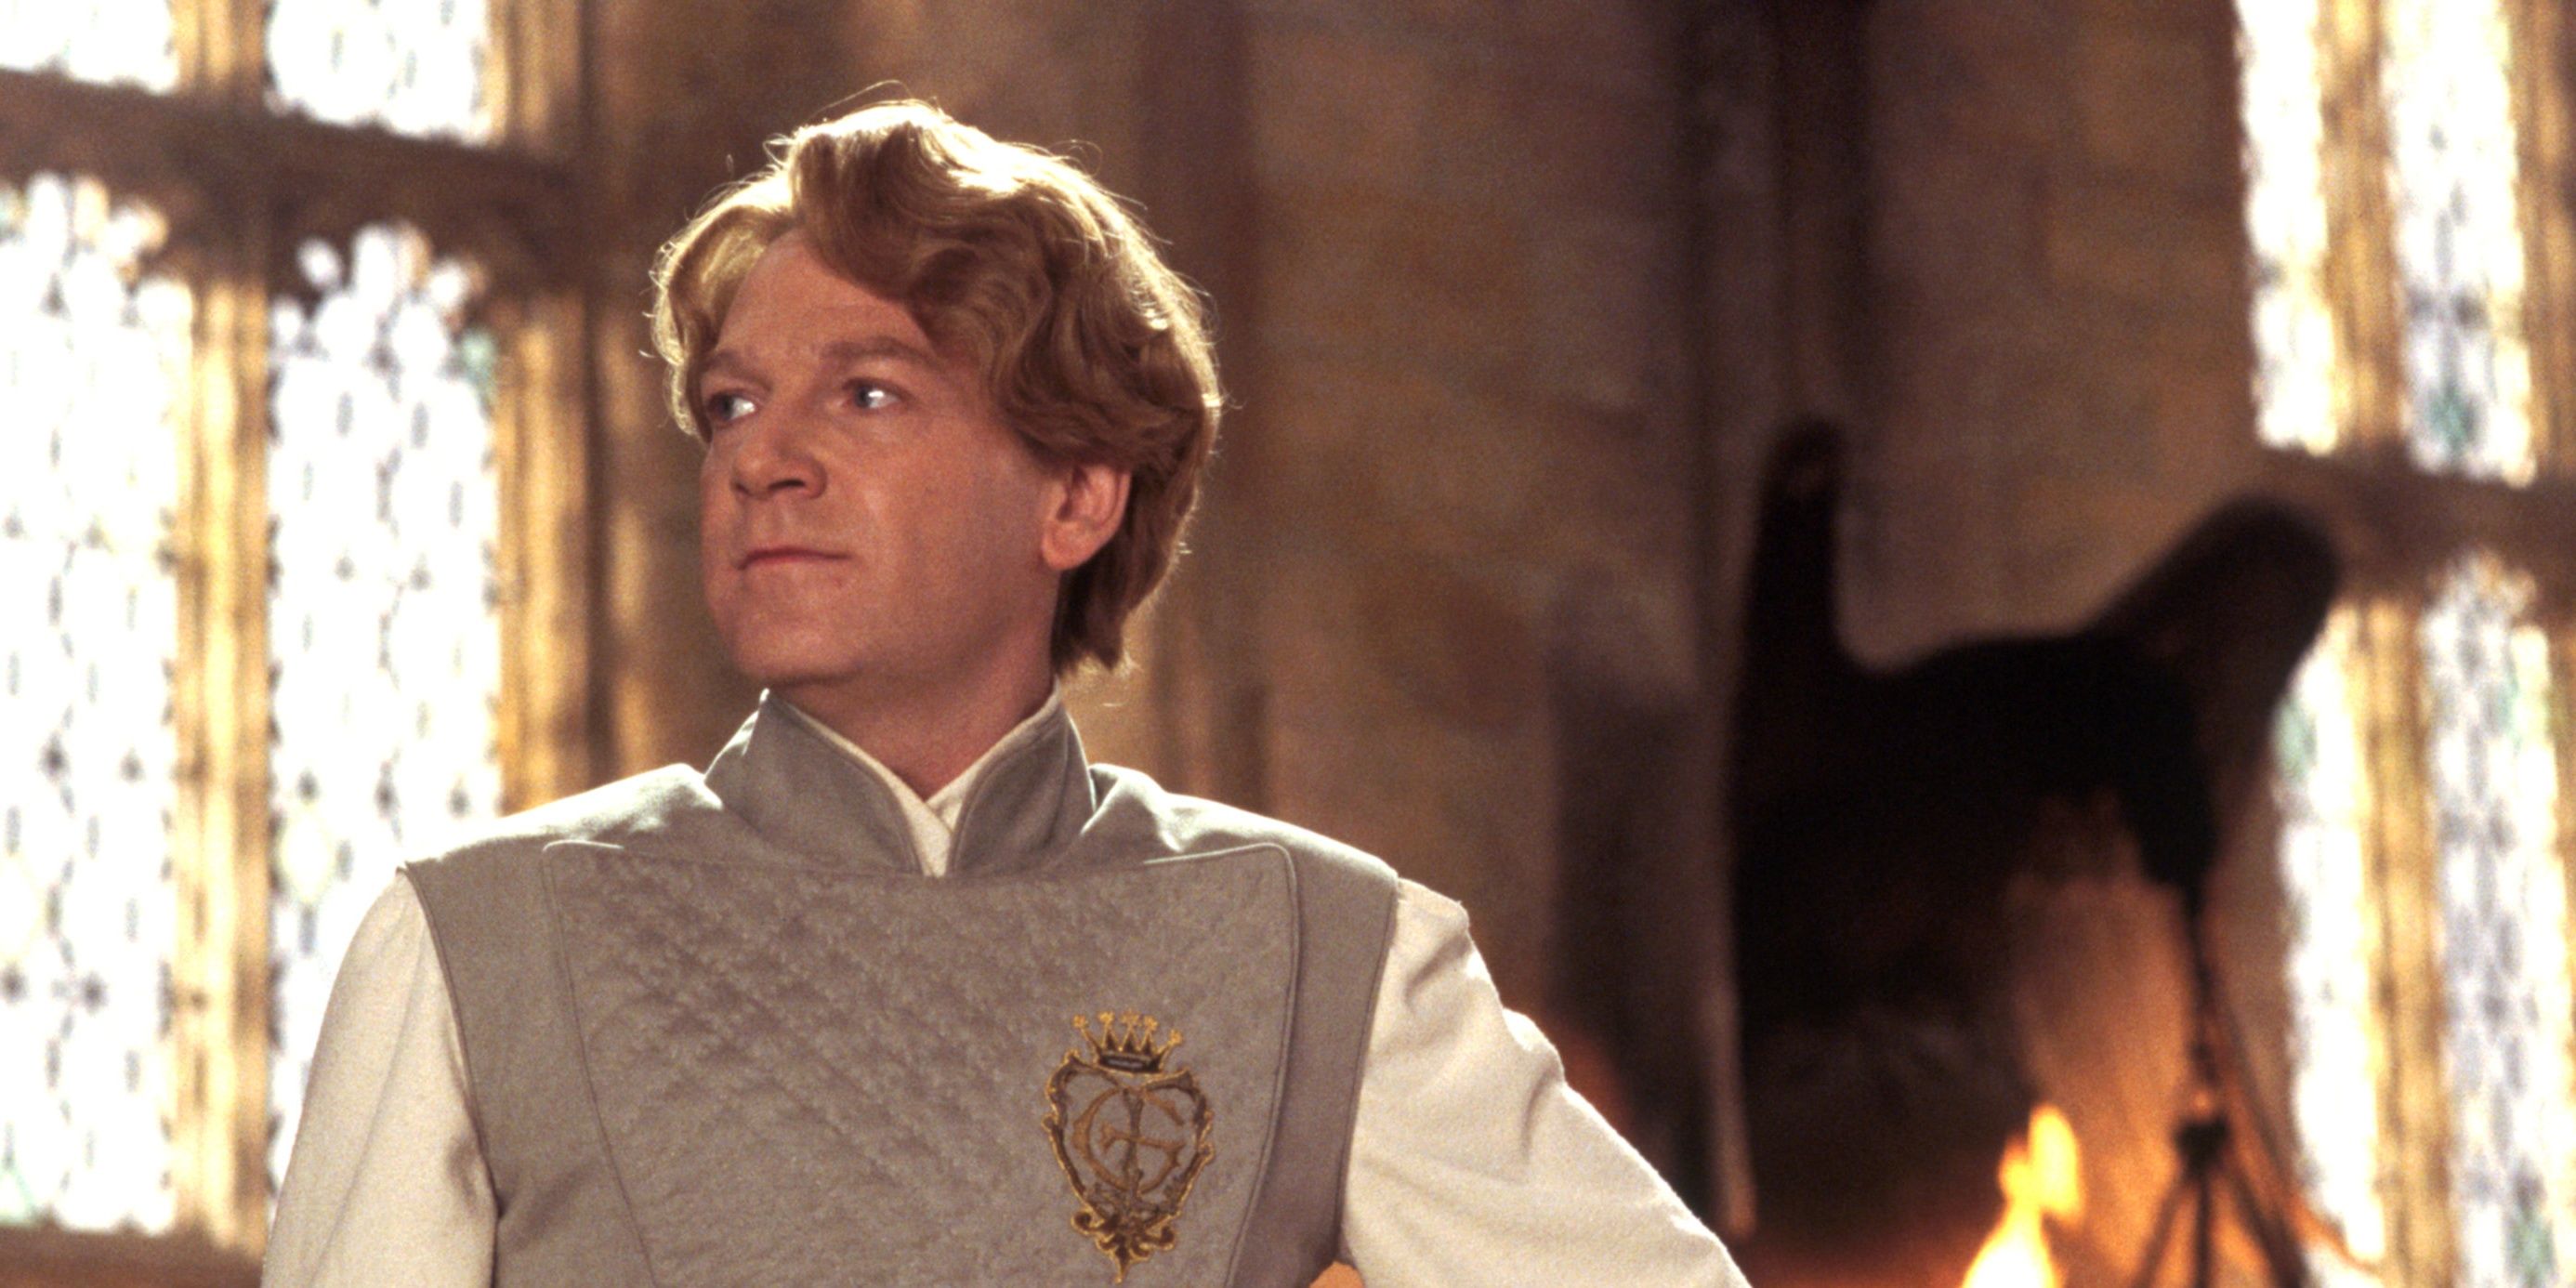 Gilderoy Lockhart in dueling clothes.